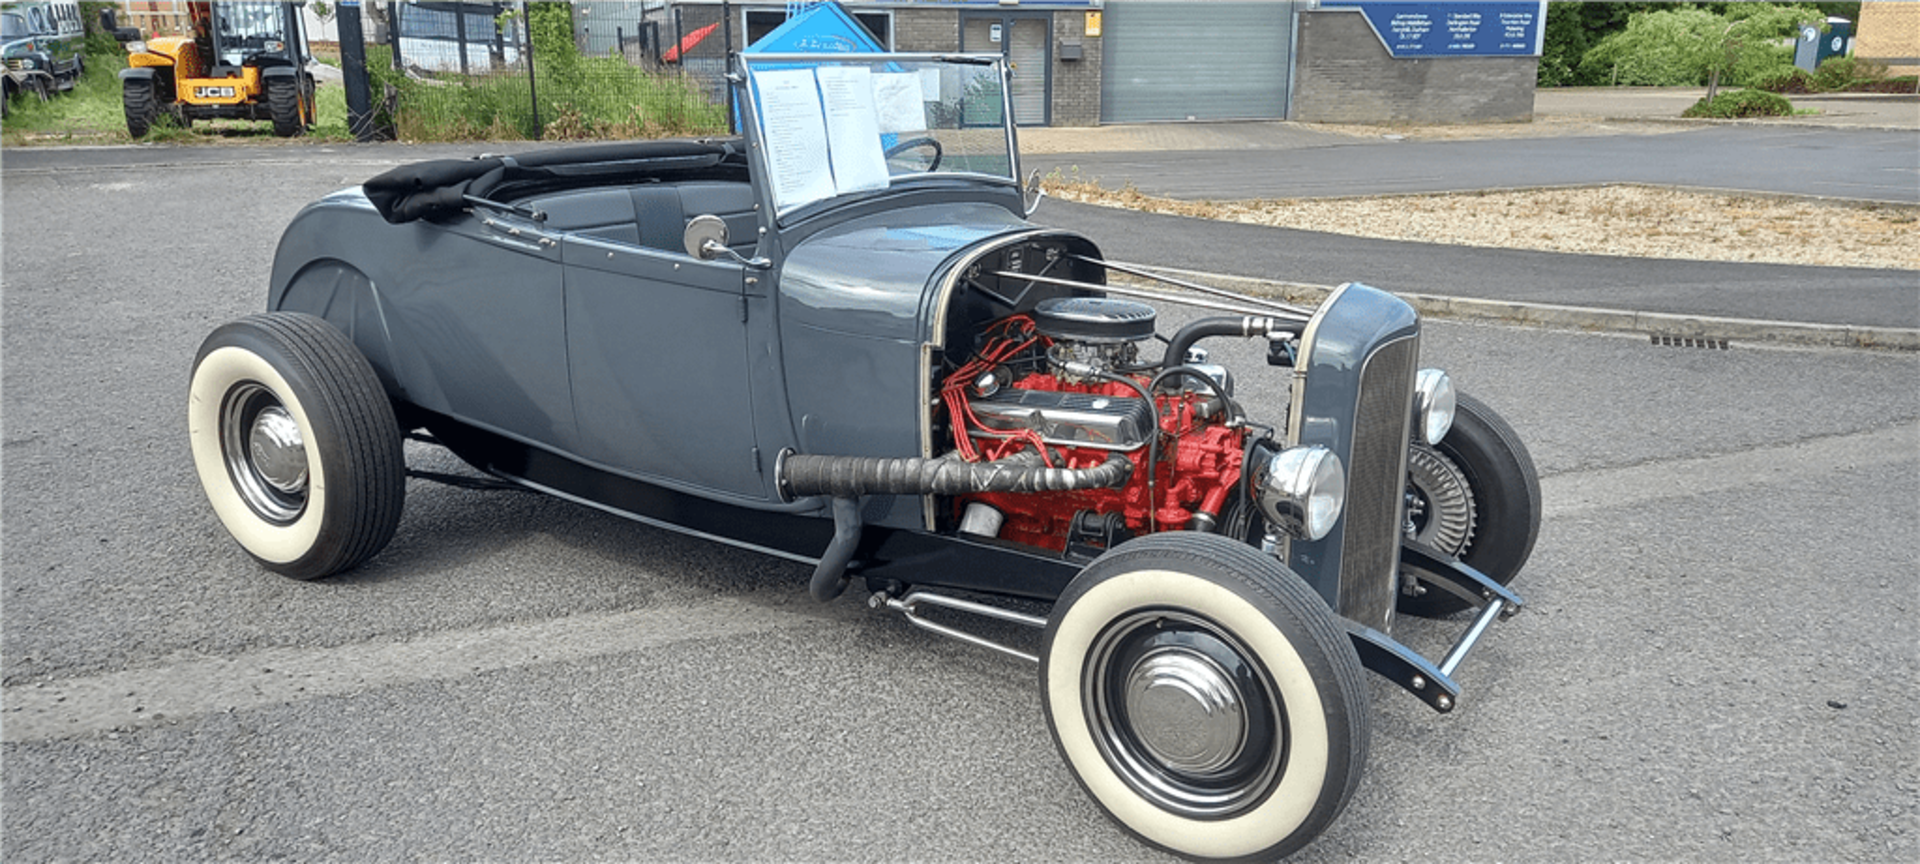 1935 FORD HOT ROD